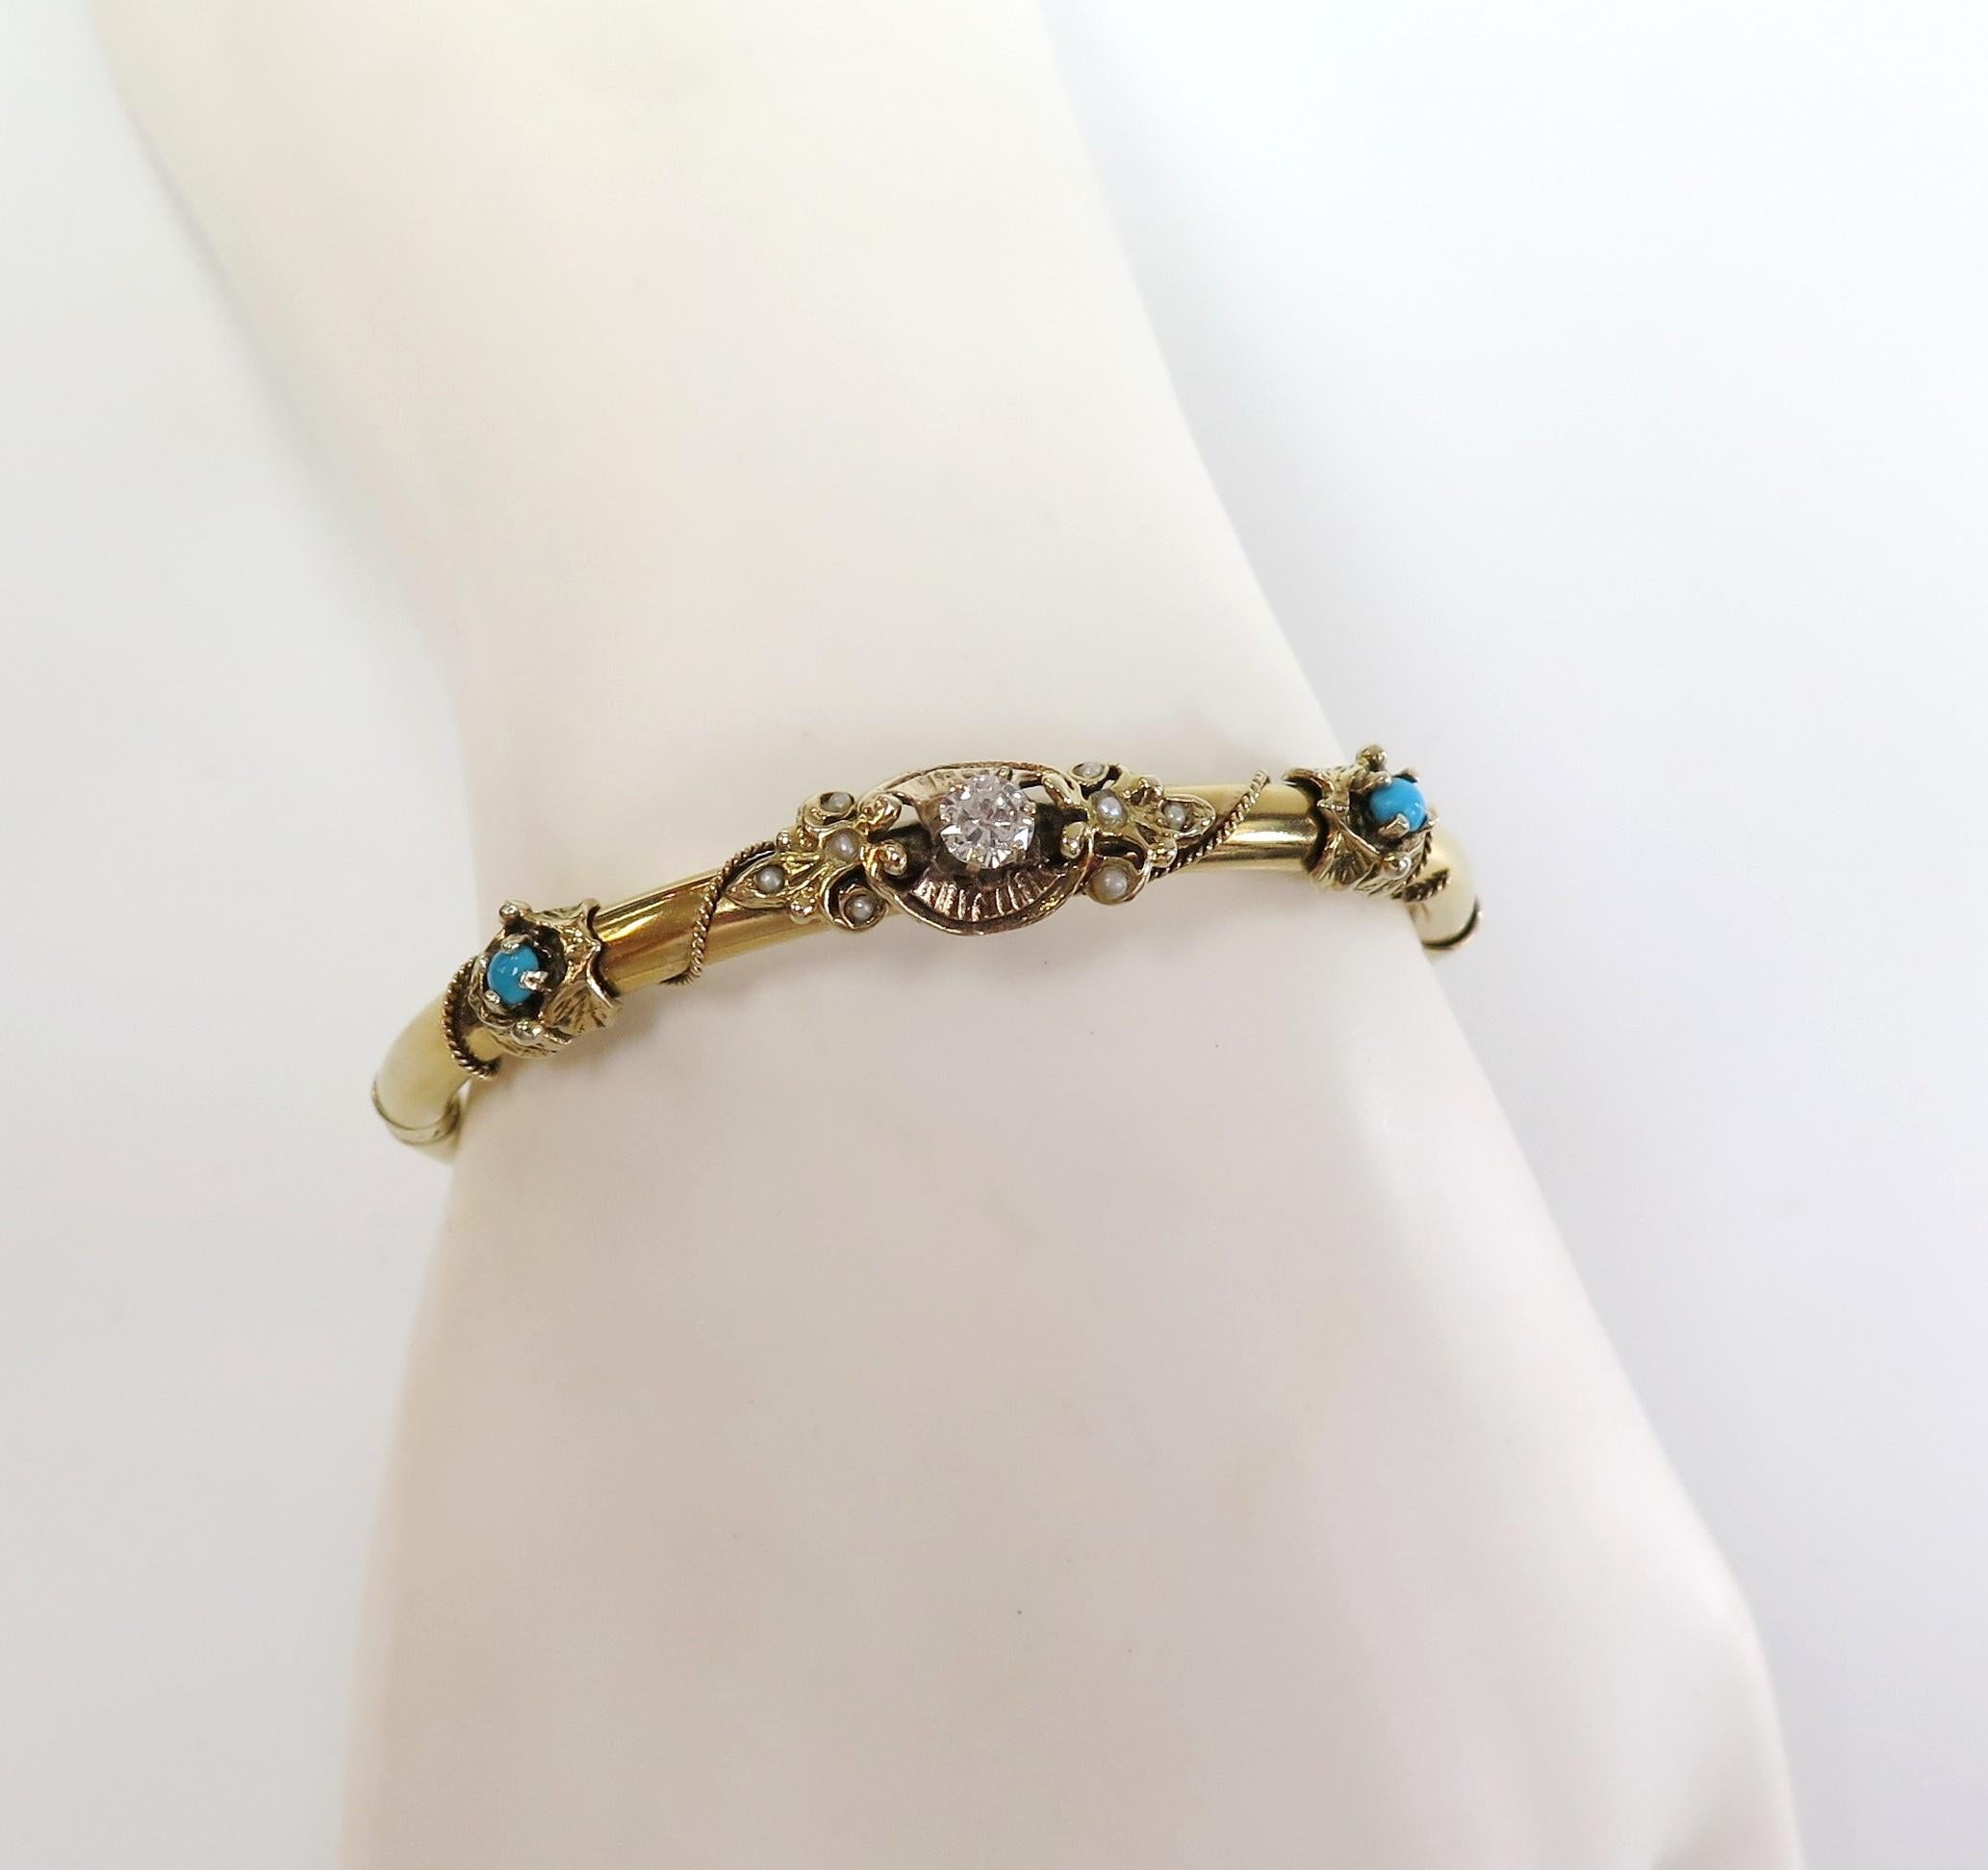 Women's Antique Bangle Bracelet with Diamond, Turquoise, and Seed Pearls 14 Karat For Sale